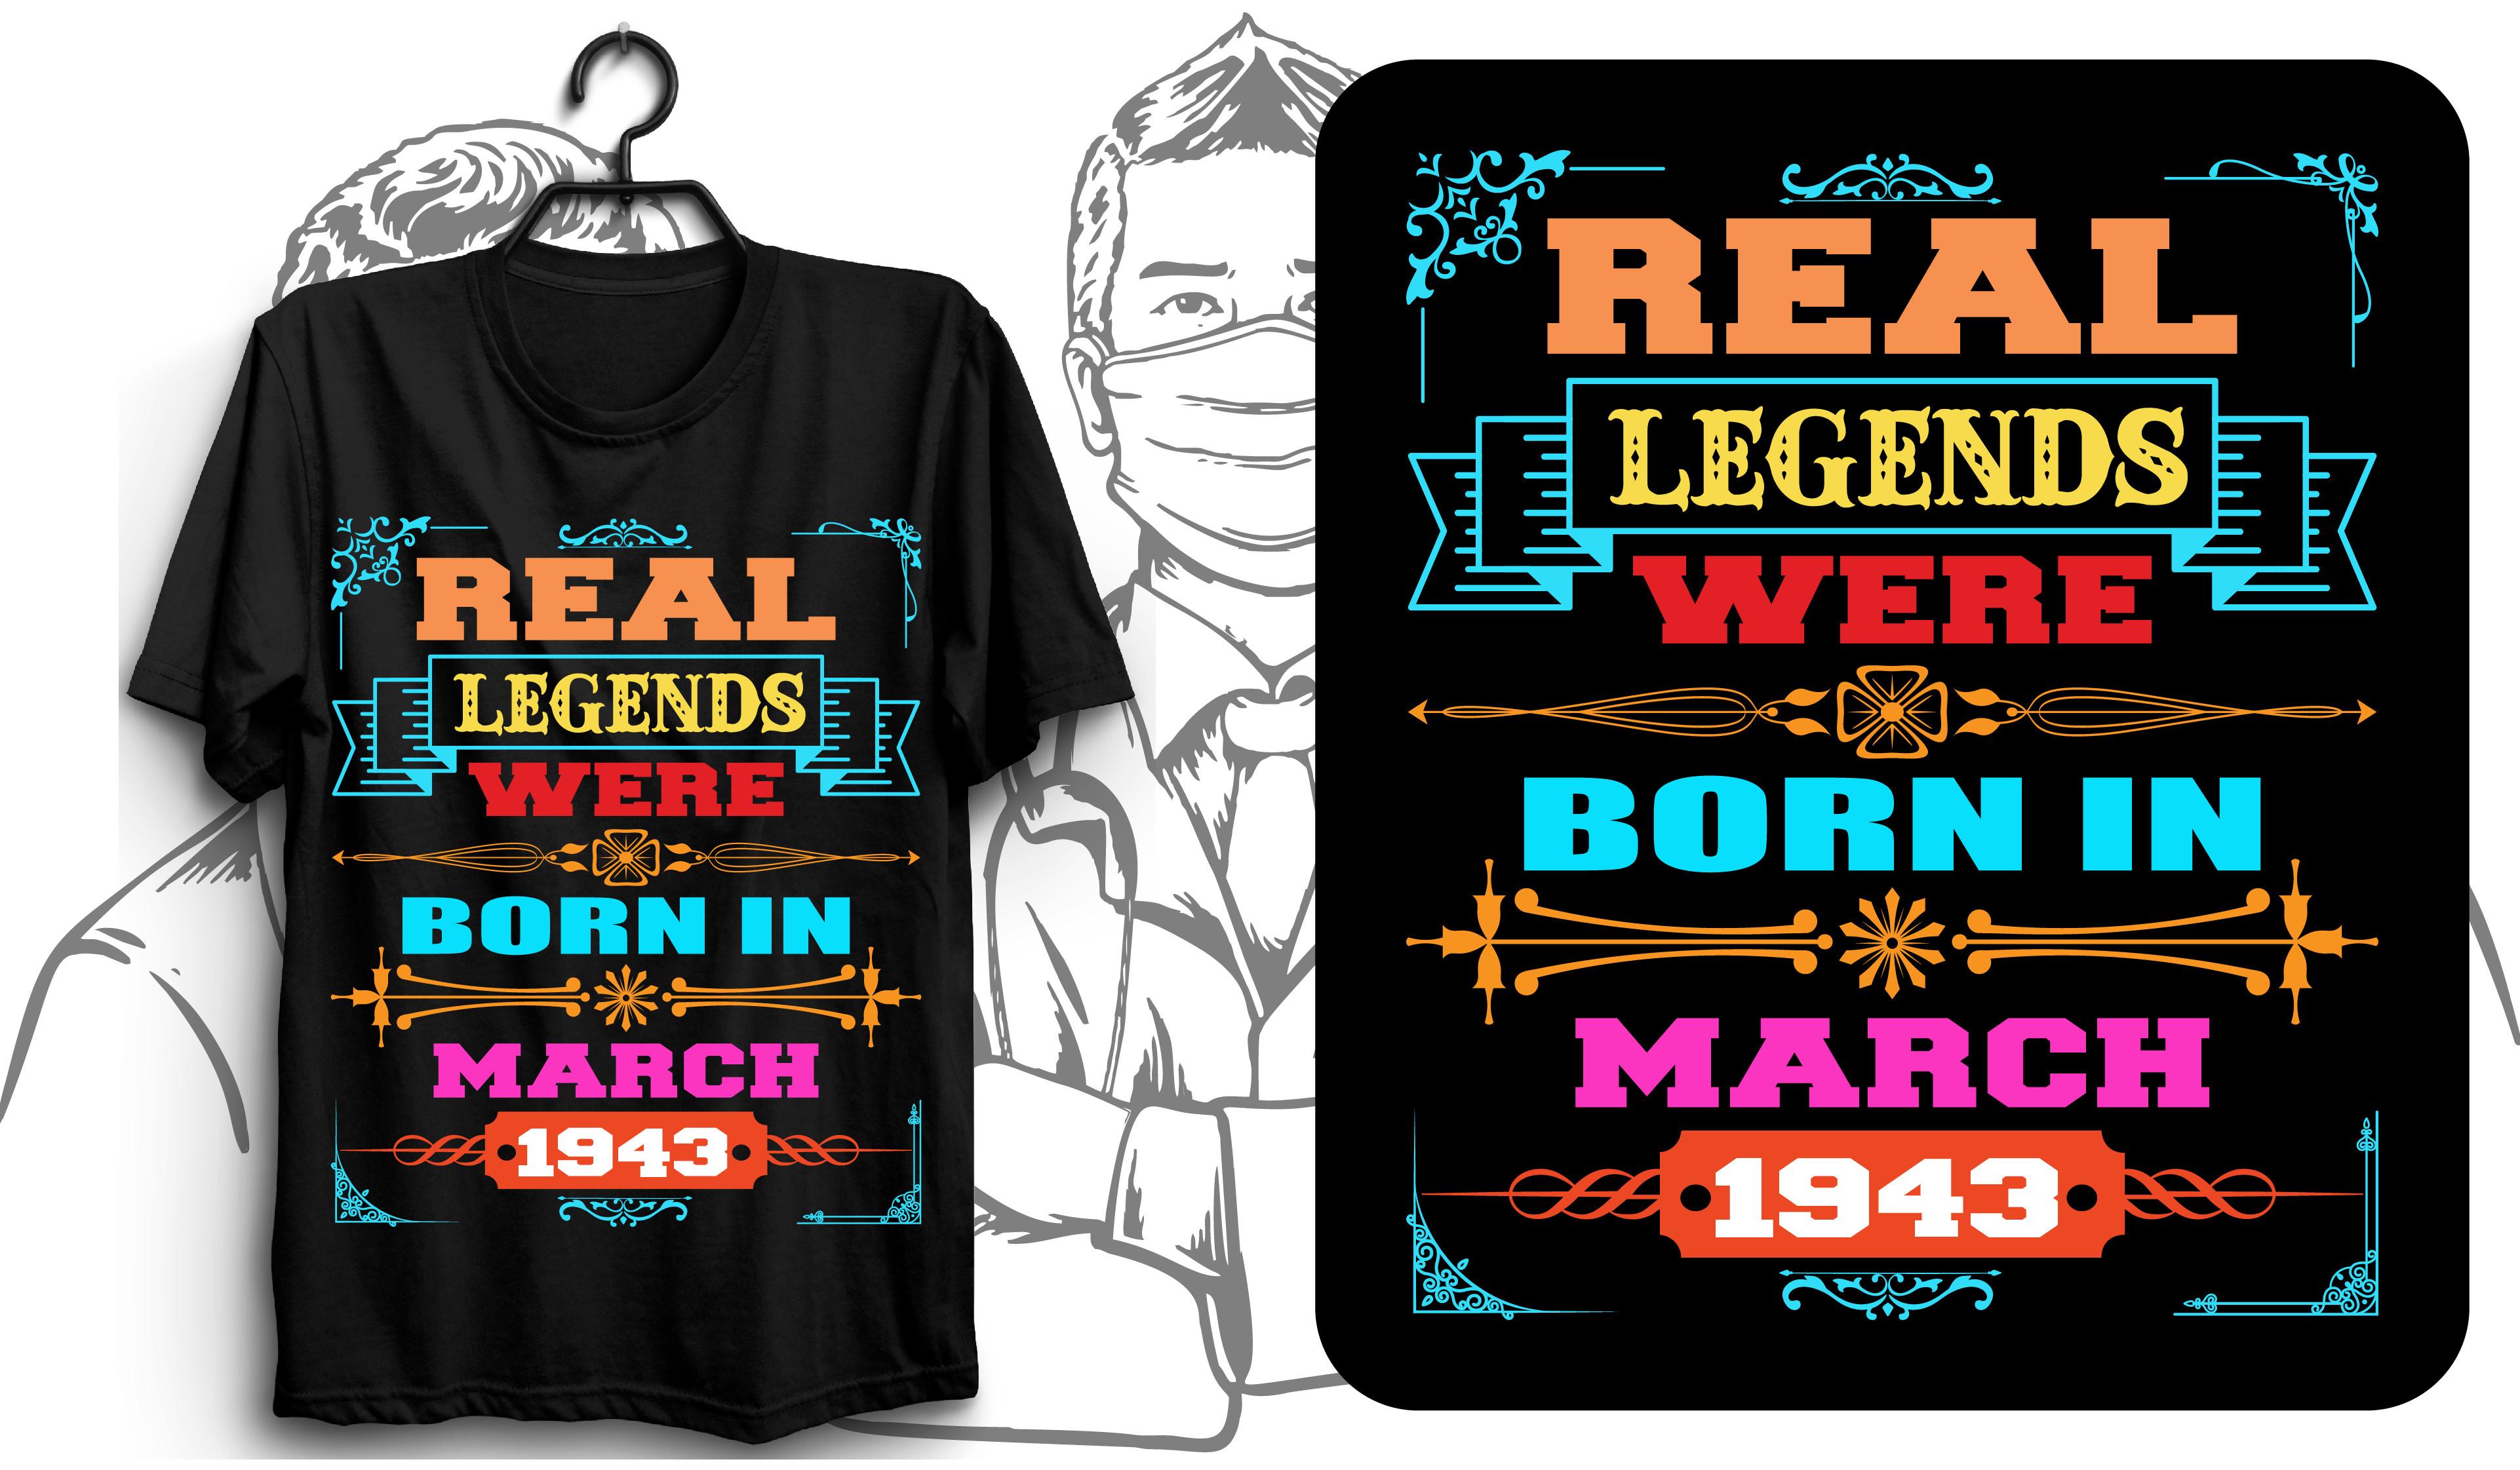 Real Legends Were Born in March 1943